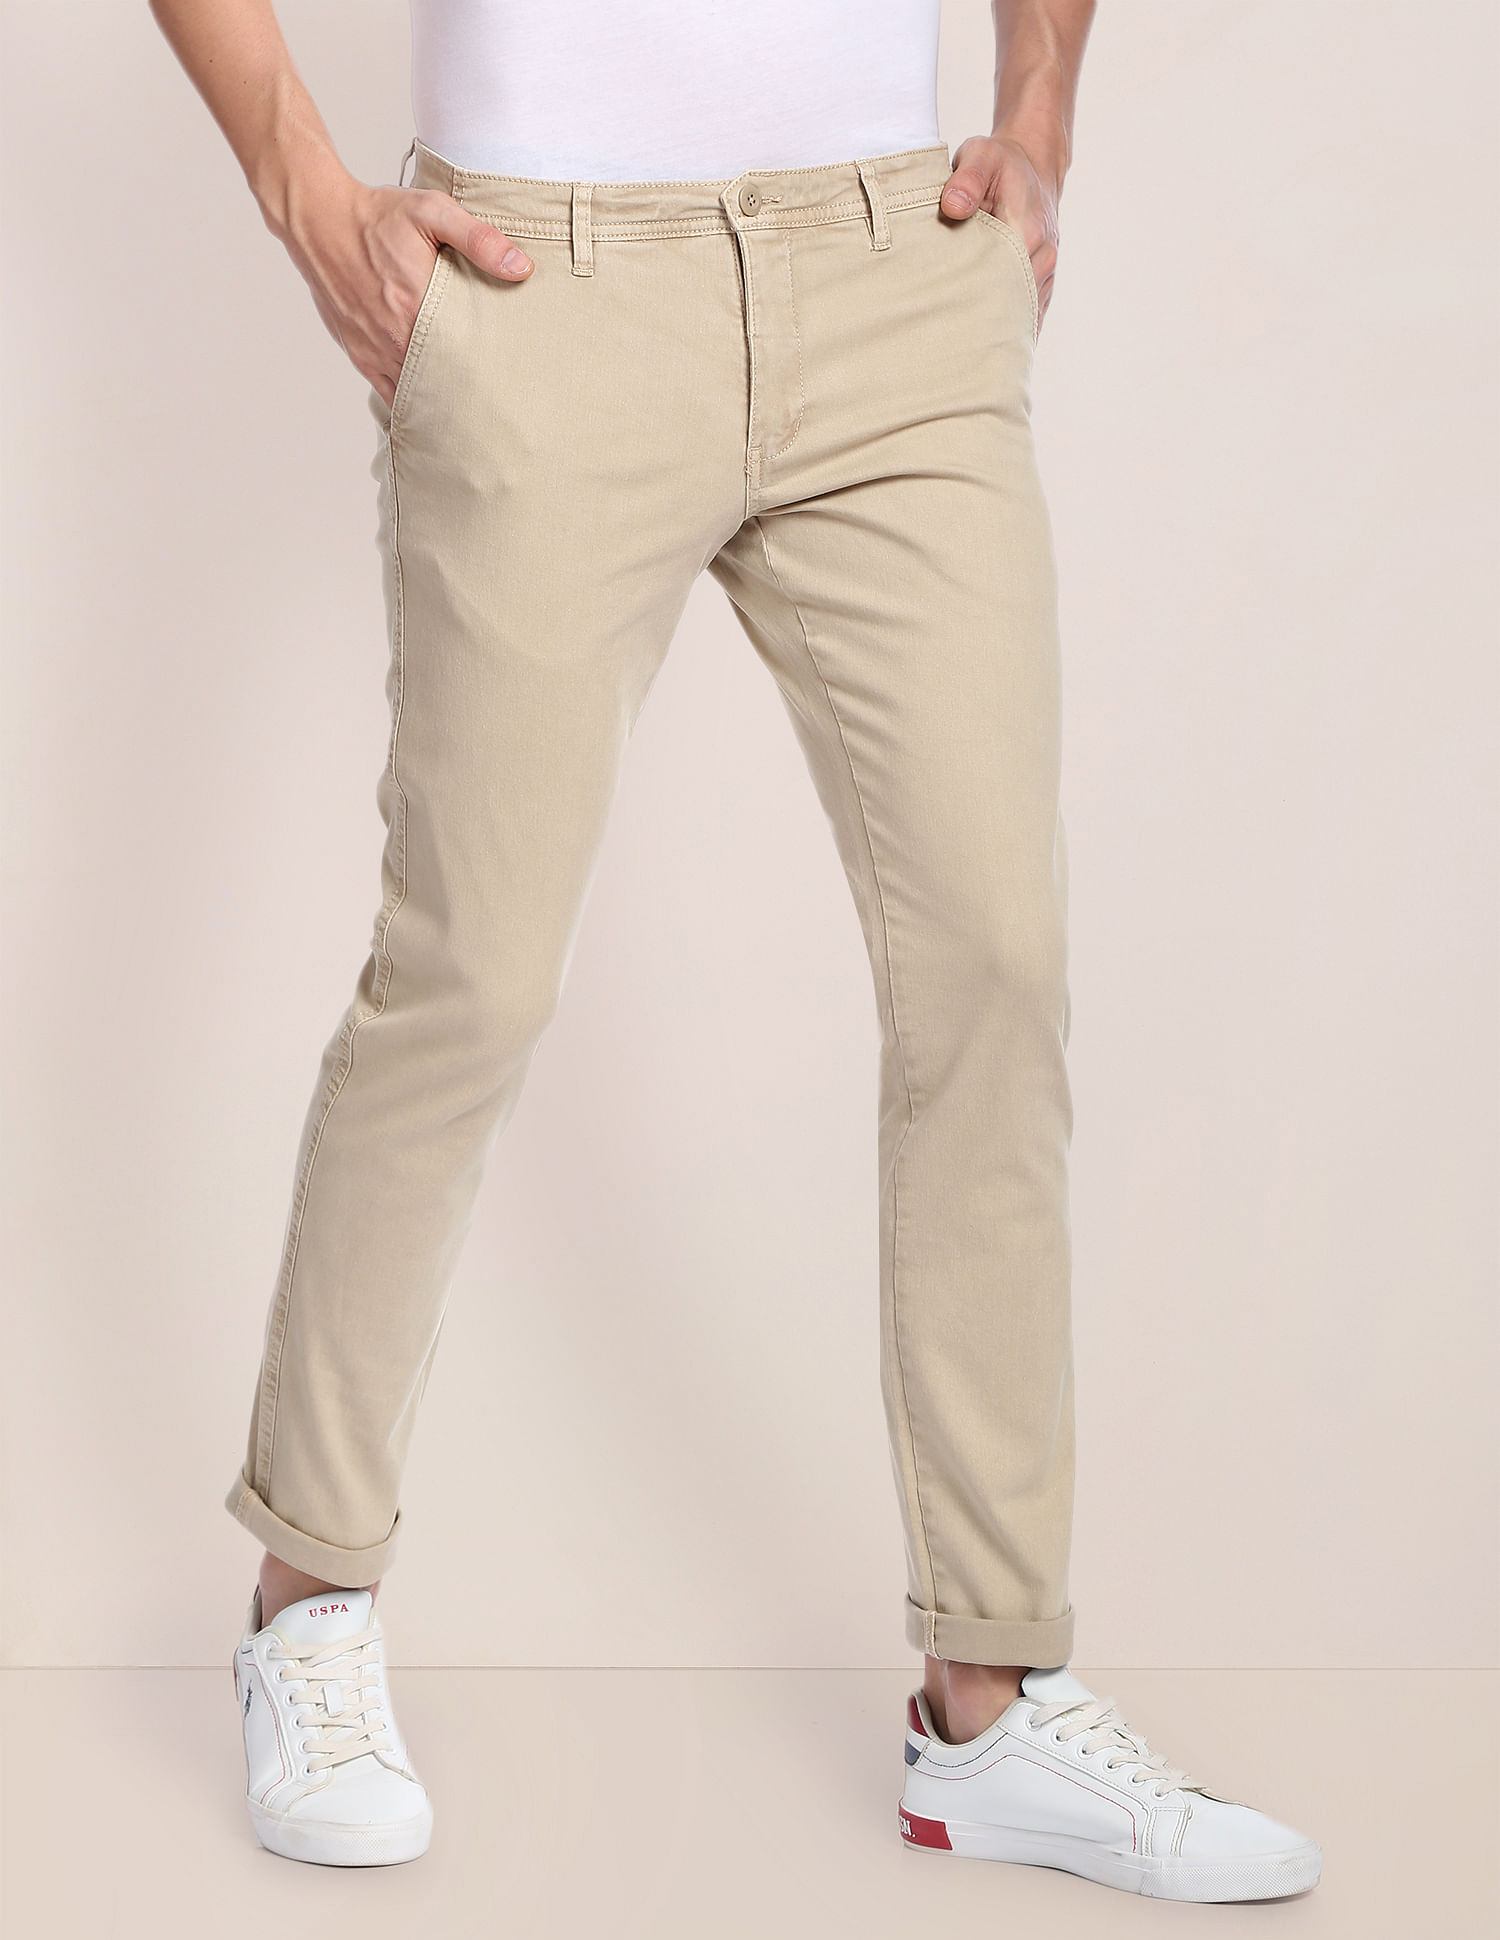 Discover more than 89 us polo pants online - in.eteachers